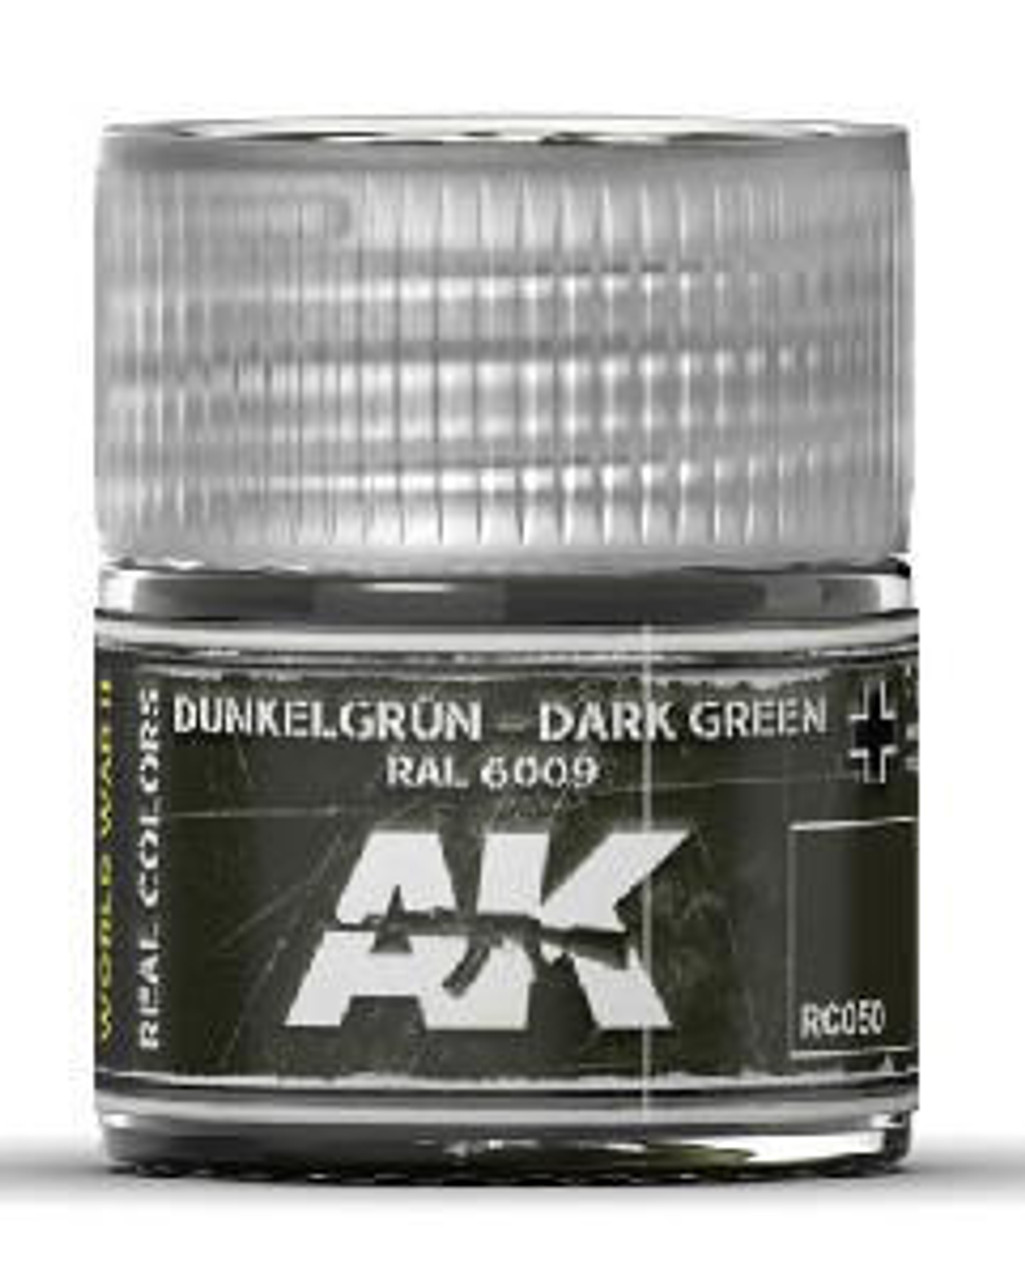 AK-RC50 AK Interactive Real Colors Dark Green RAL6009 Acrylic Lacquer Paint 10ml Bottle  MMD Squadron